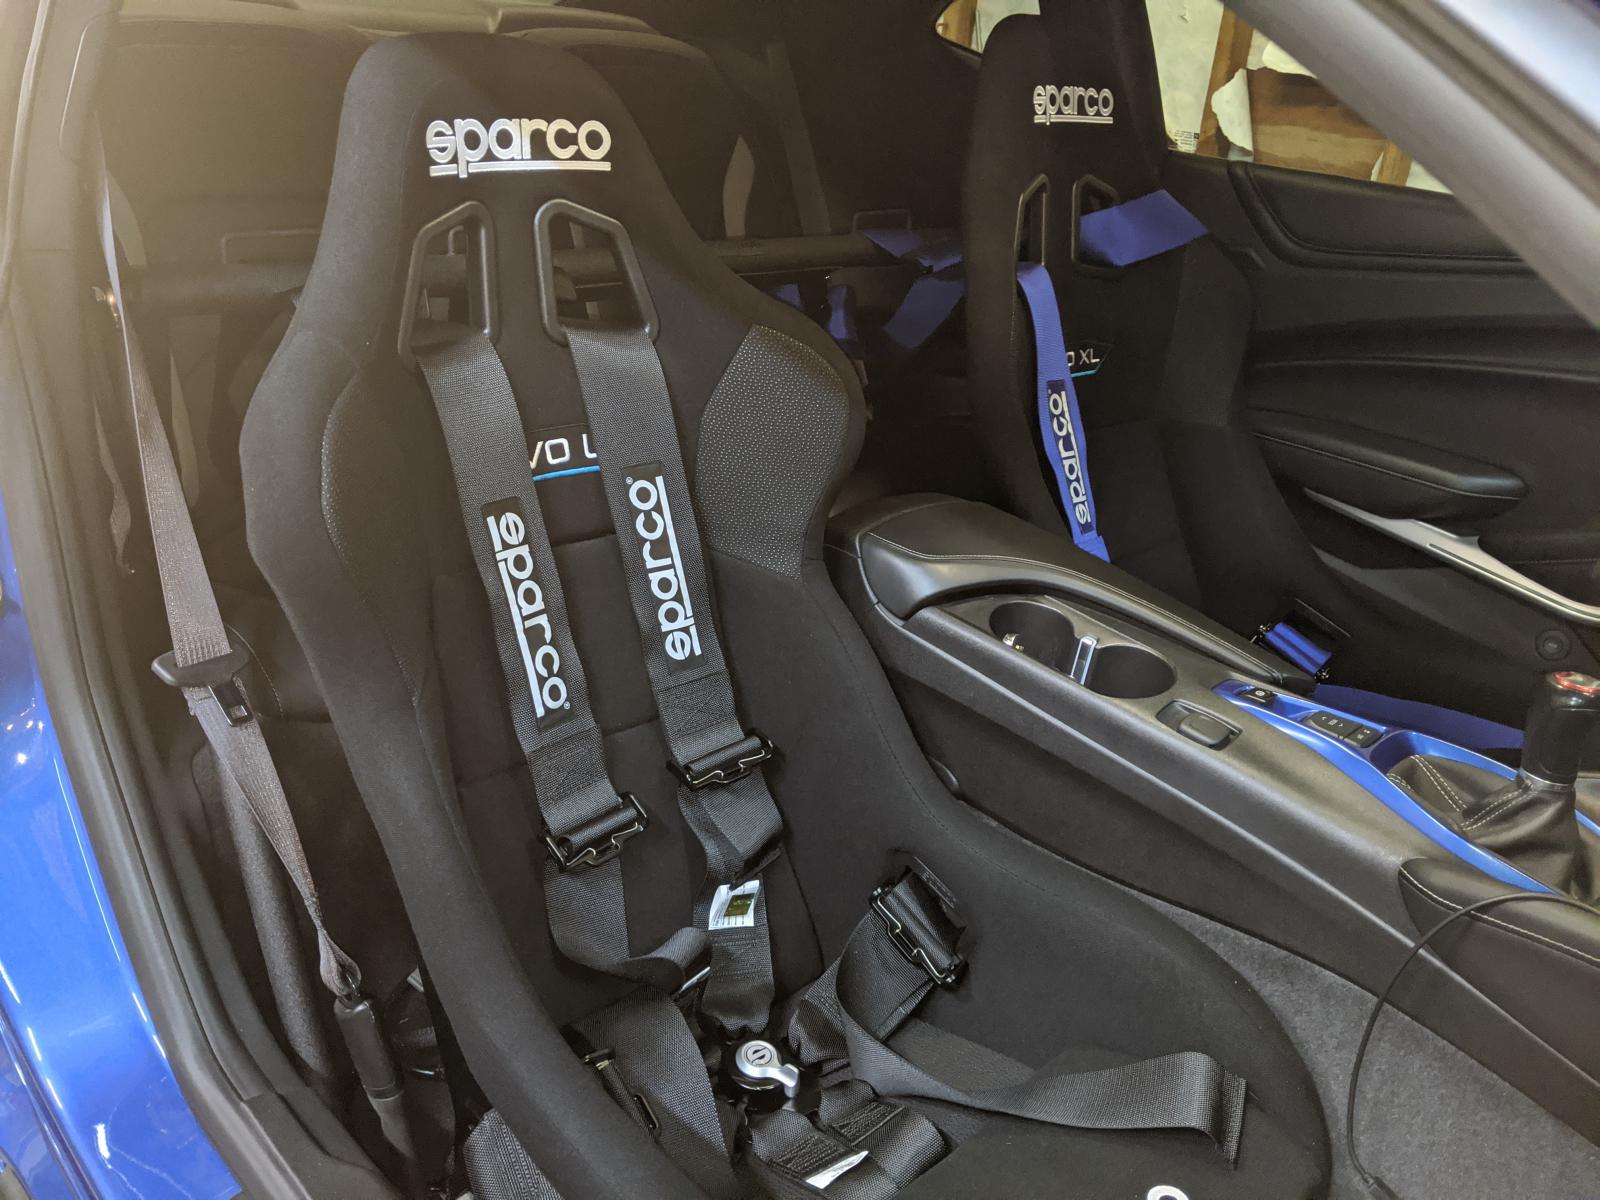 Sparco USA - Motorsports Racing Apparel and Accessories. EVO XL CARBON